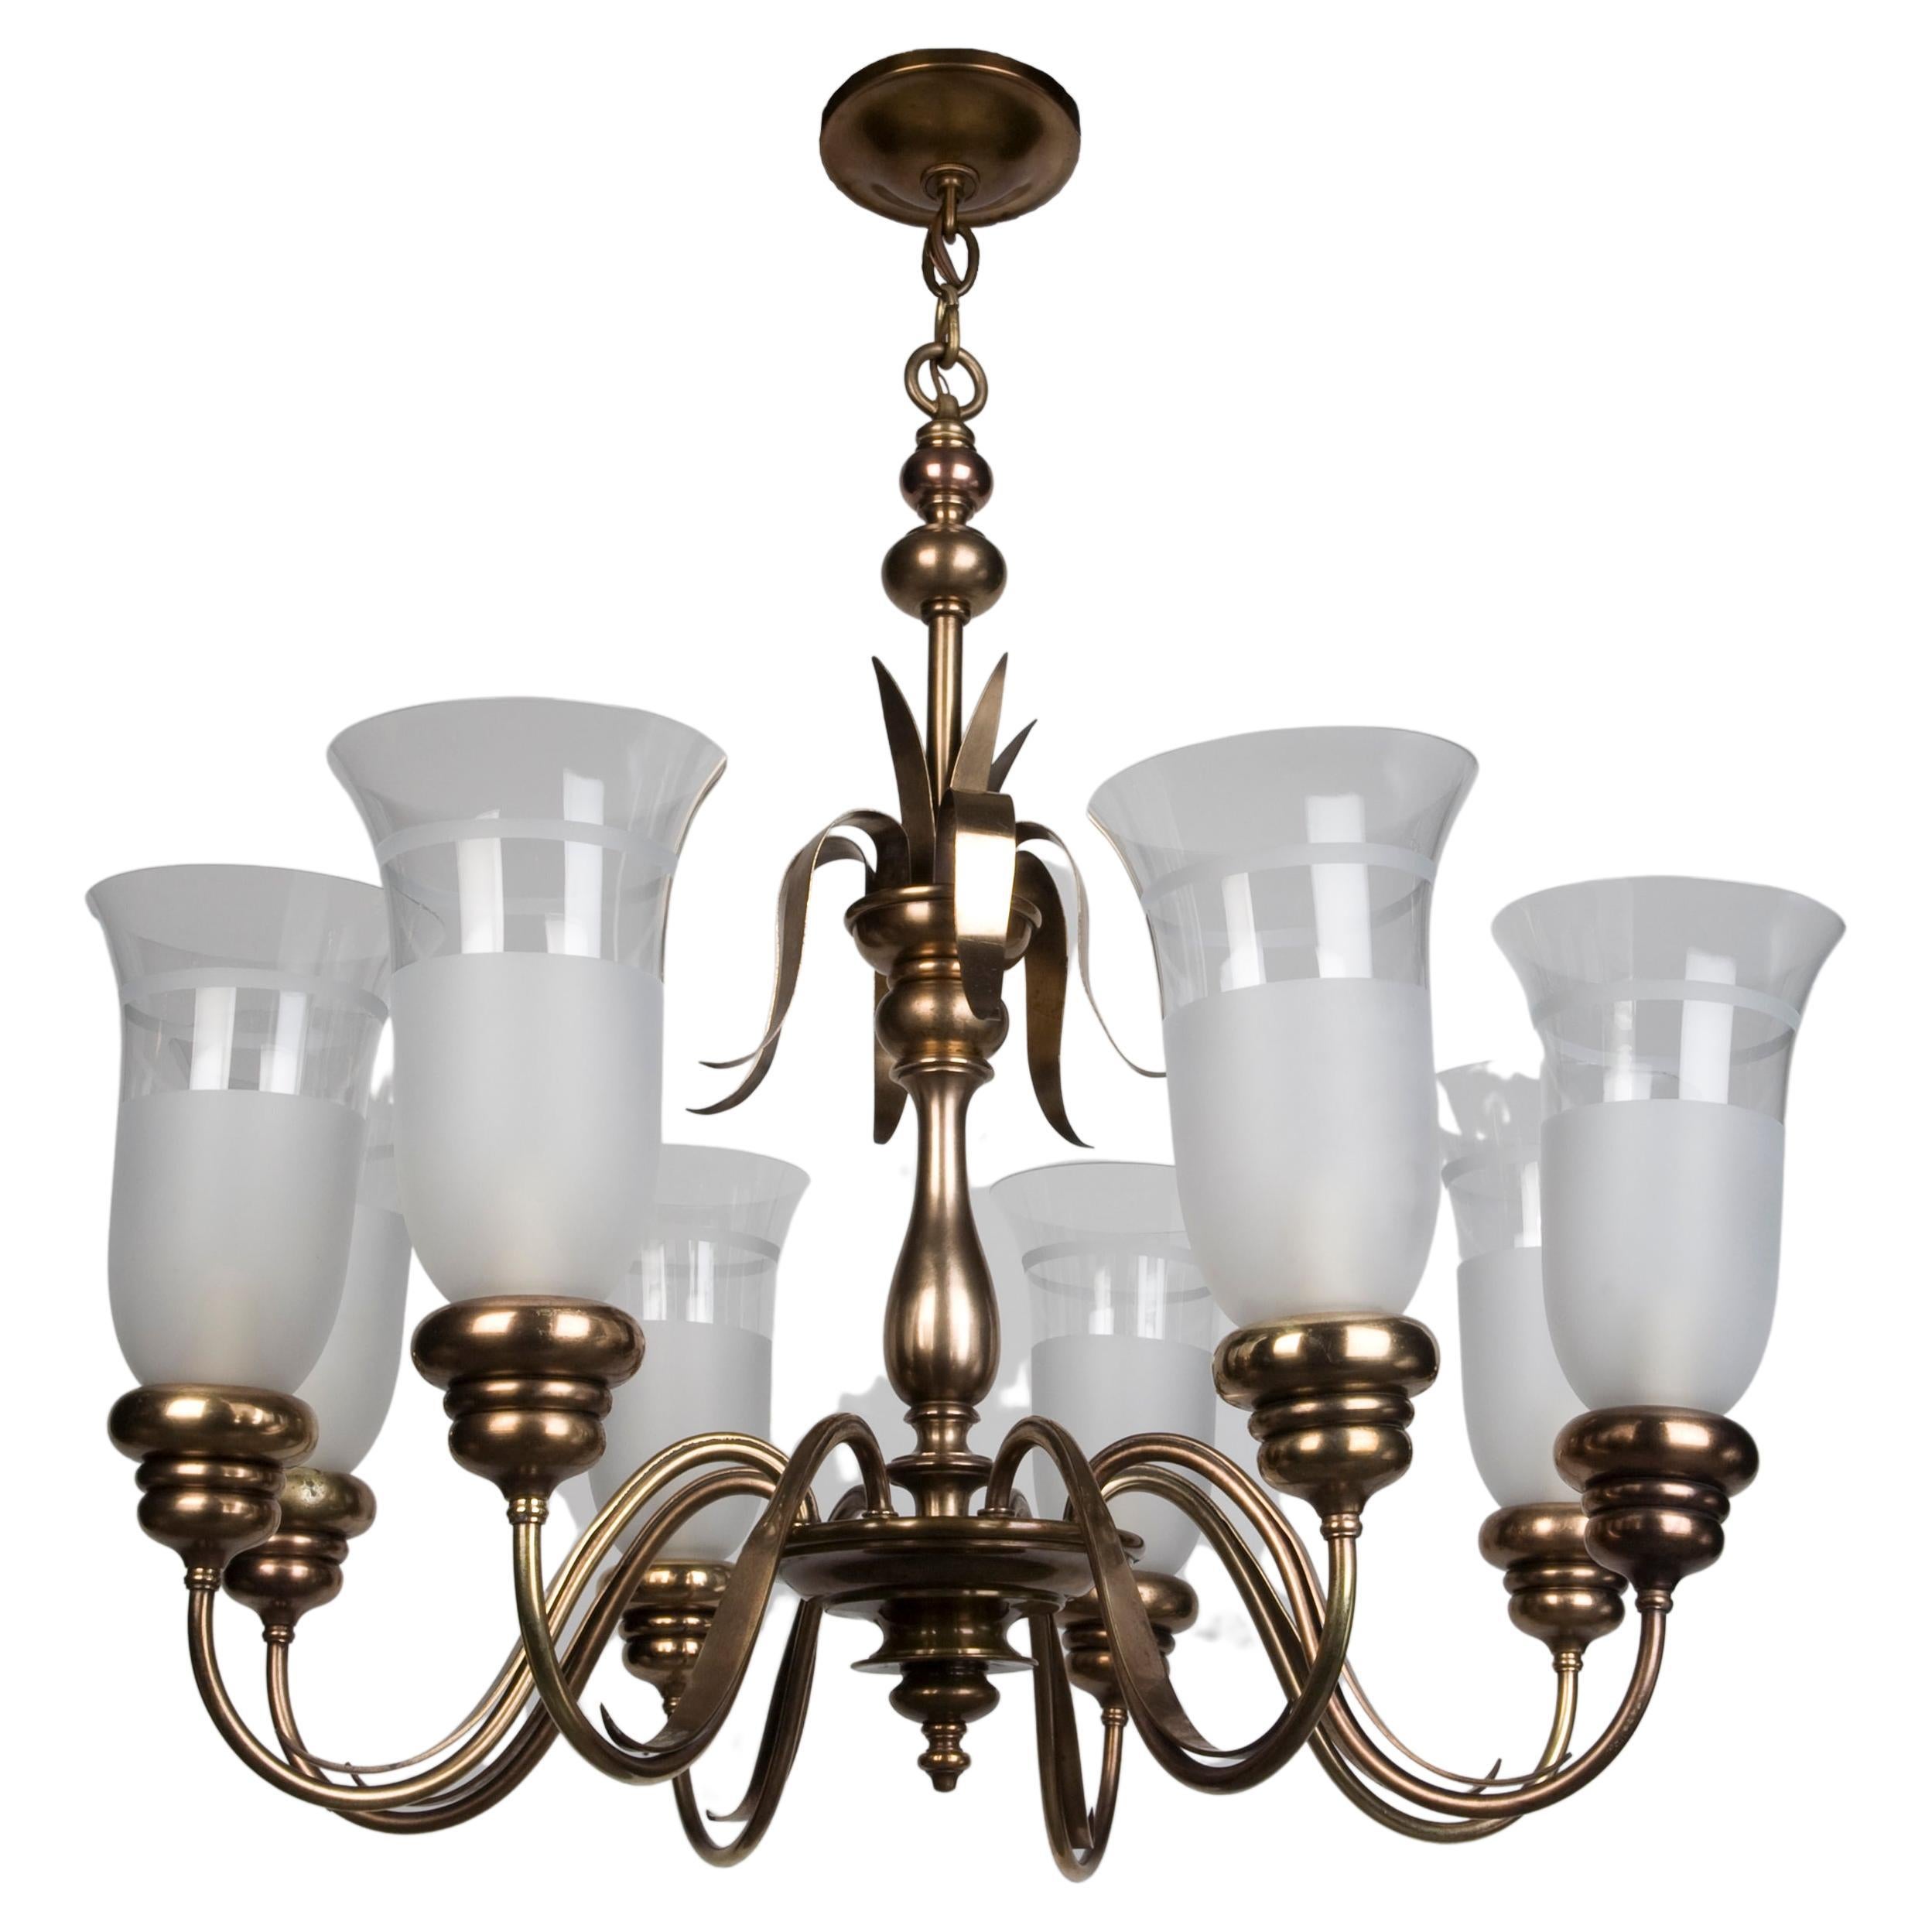 E. F. Caldwell Brass Chandelier with Frosted Hurricane Glass Shades, Circa 1940s For Sale